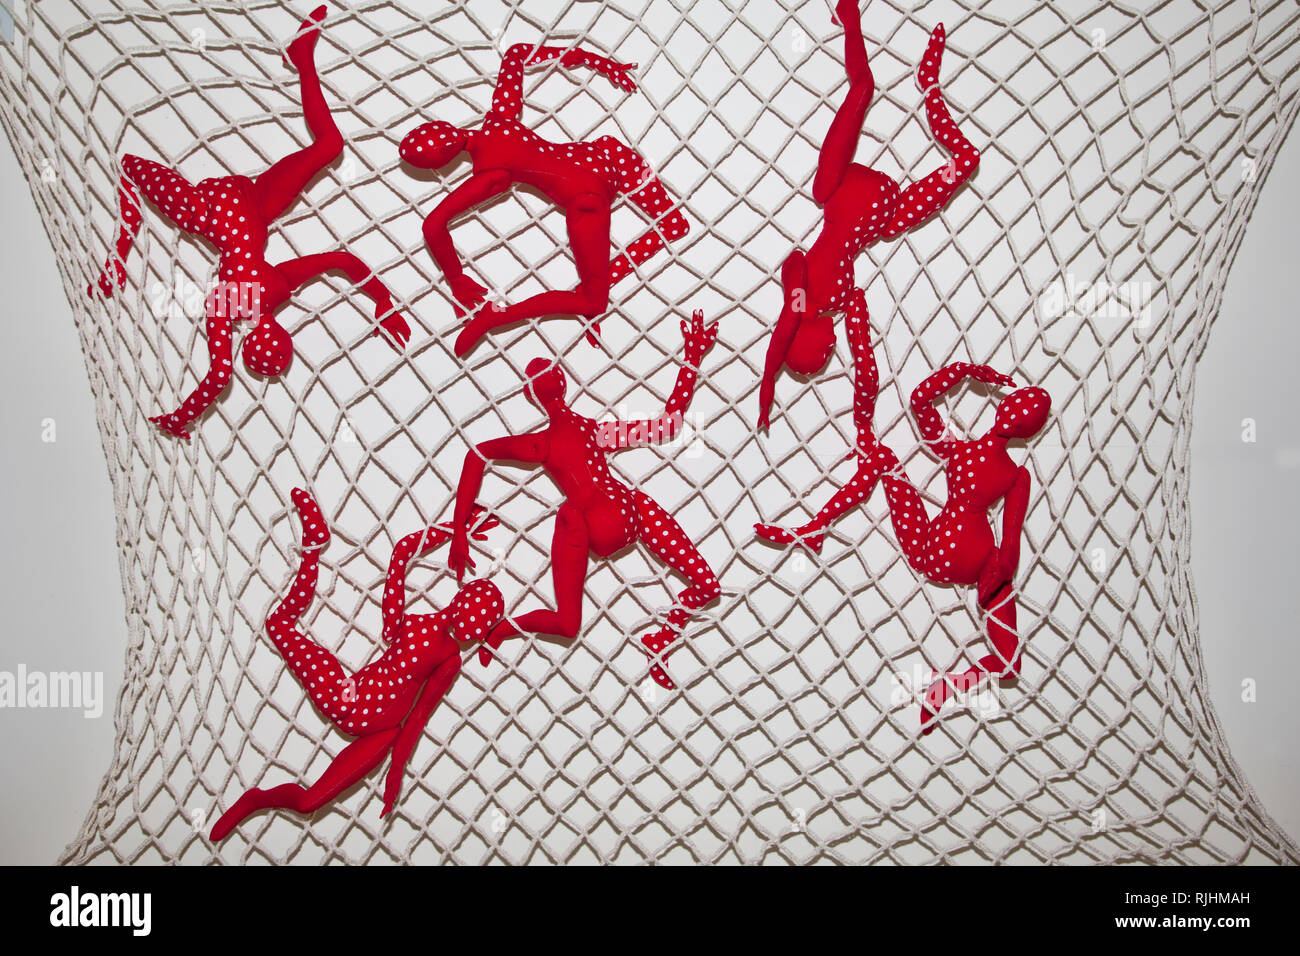 Artistic representation of articulated cloth figures entangled in a net of crocheted cotton in a fibre art construction by Judy M Tadman Stock Photo